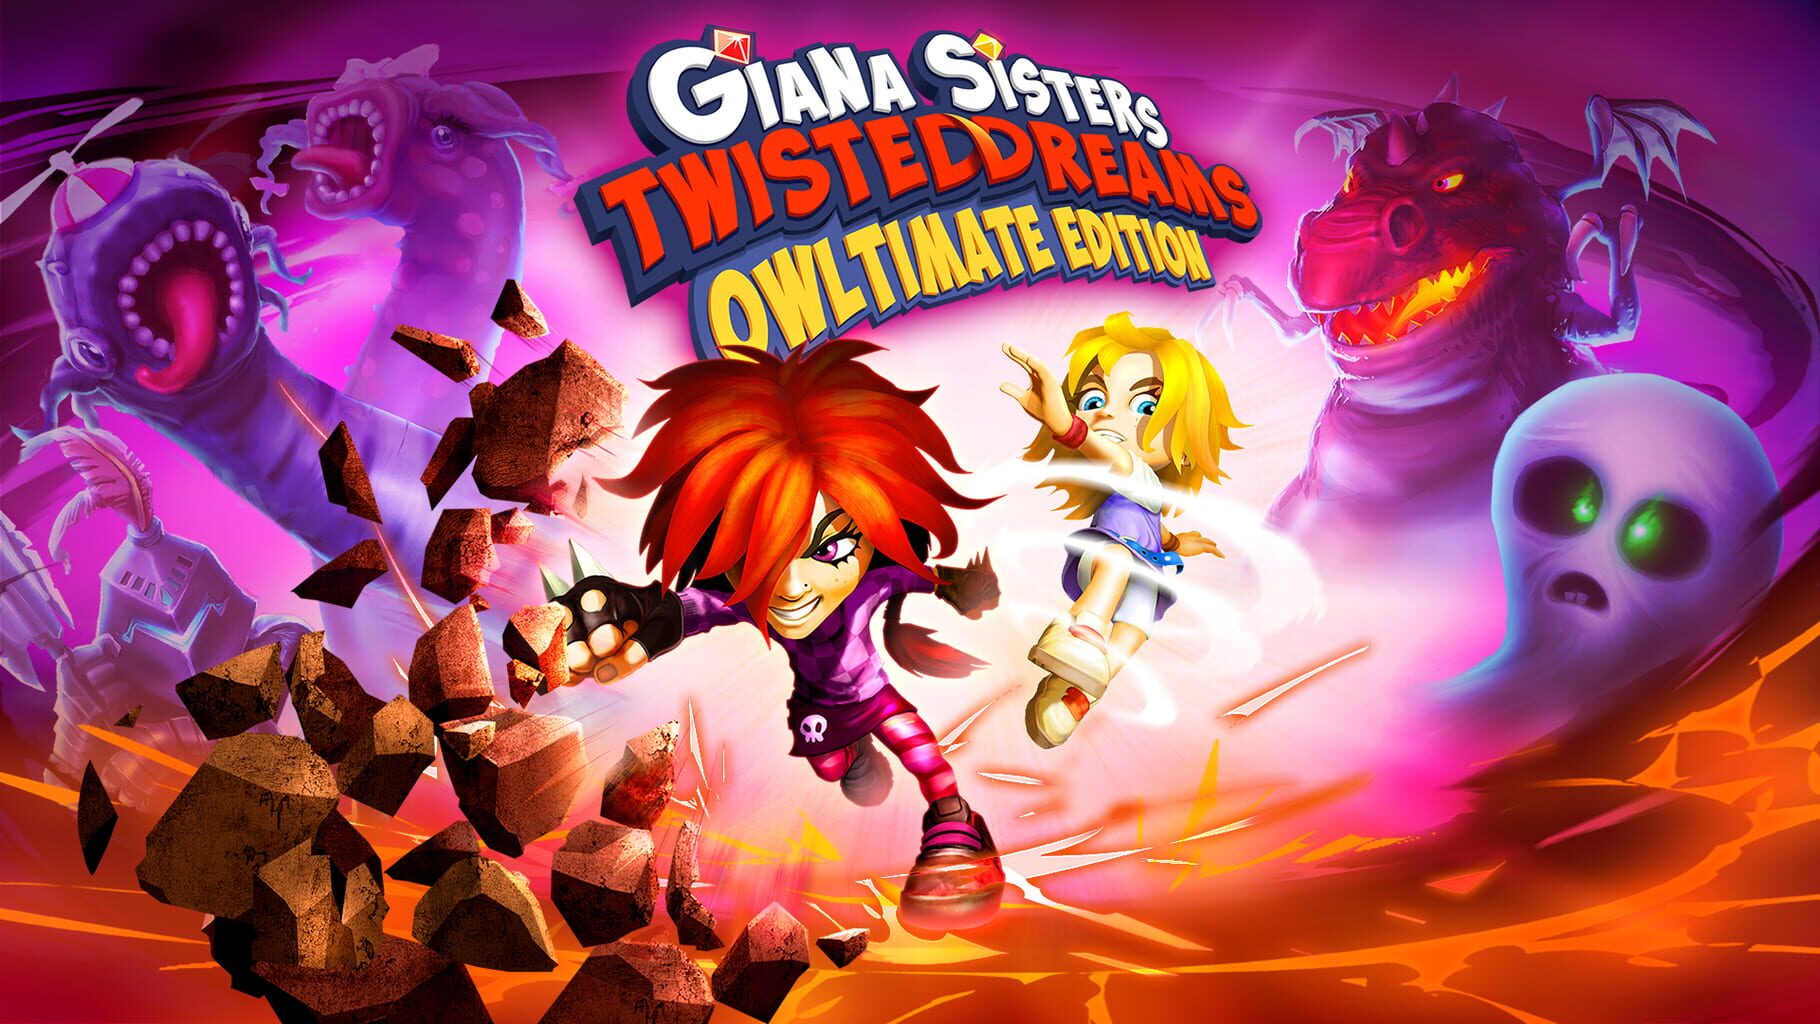 Giana Sisters: Twisted Dreams - Owltimate Edition artwork